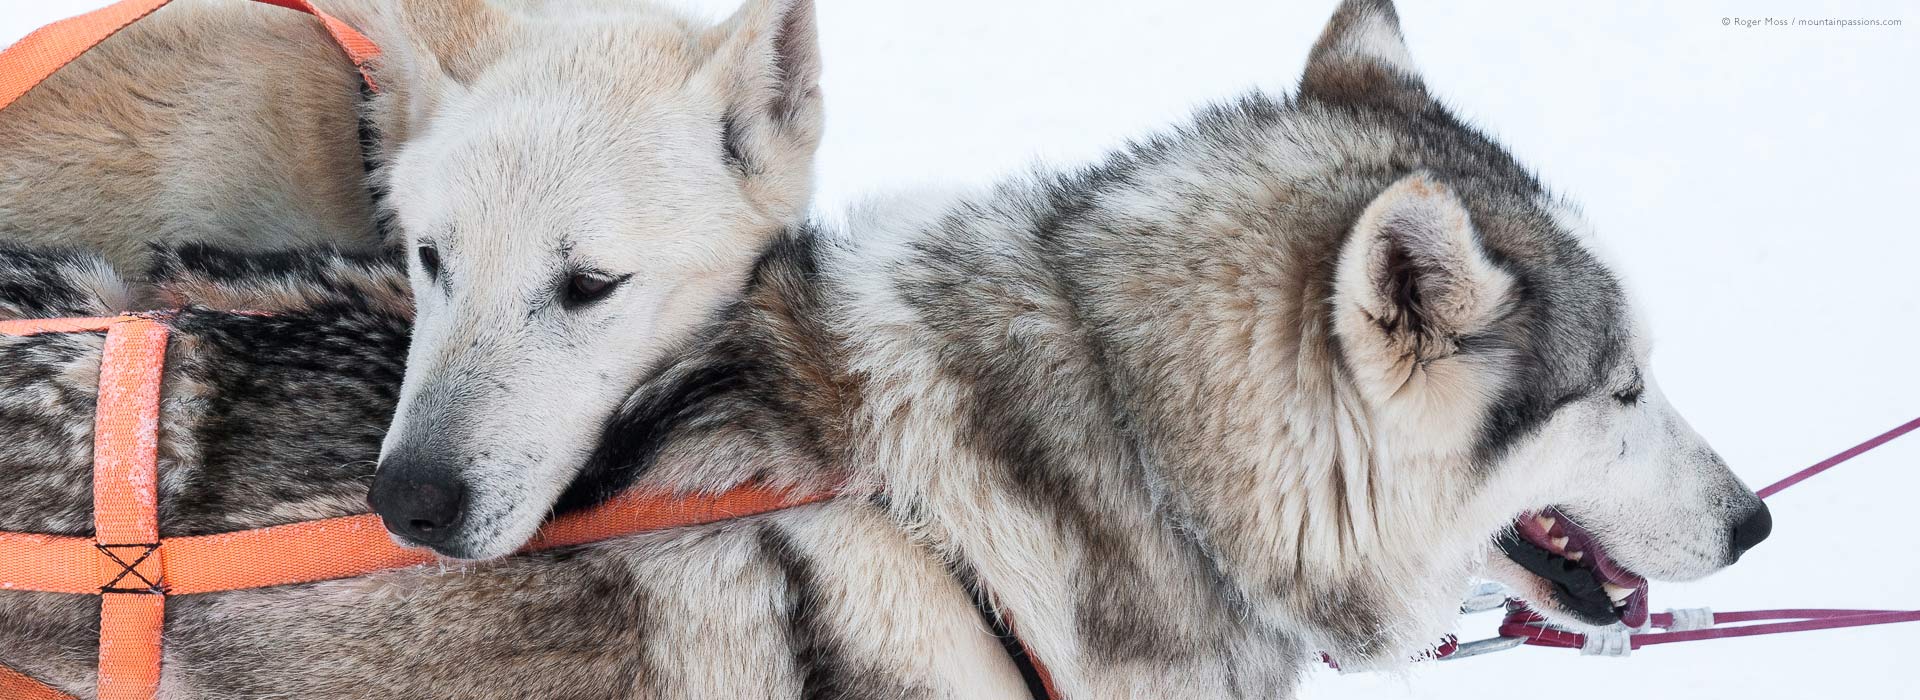 Close-up of heads of two sled dogs, dog-sledding at La Chapelle d'Abondance, Portes du Soleil ski area, French Alps.